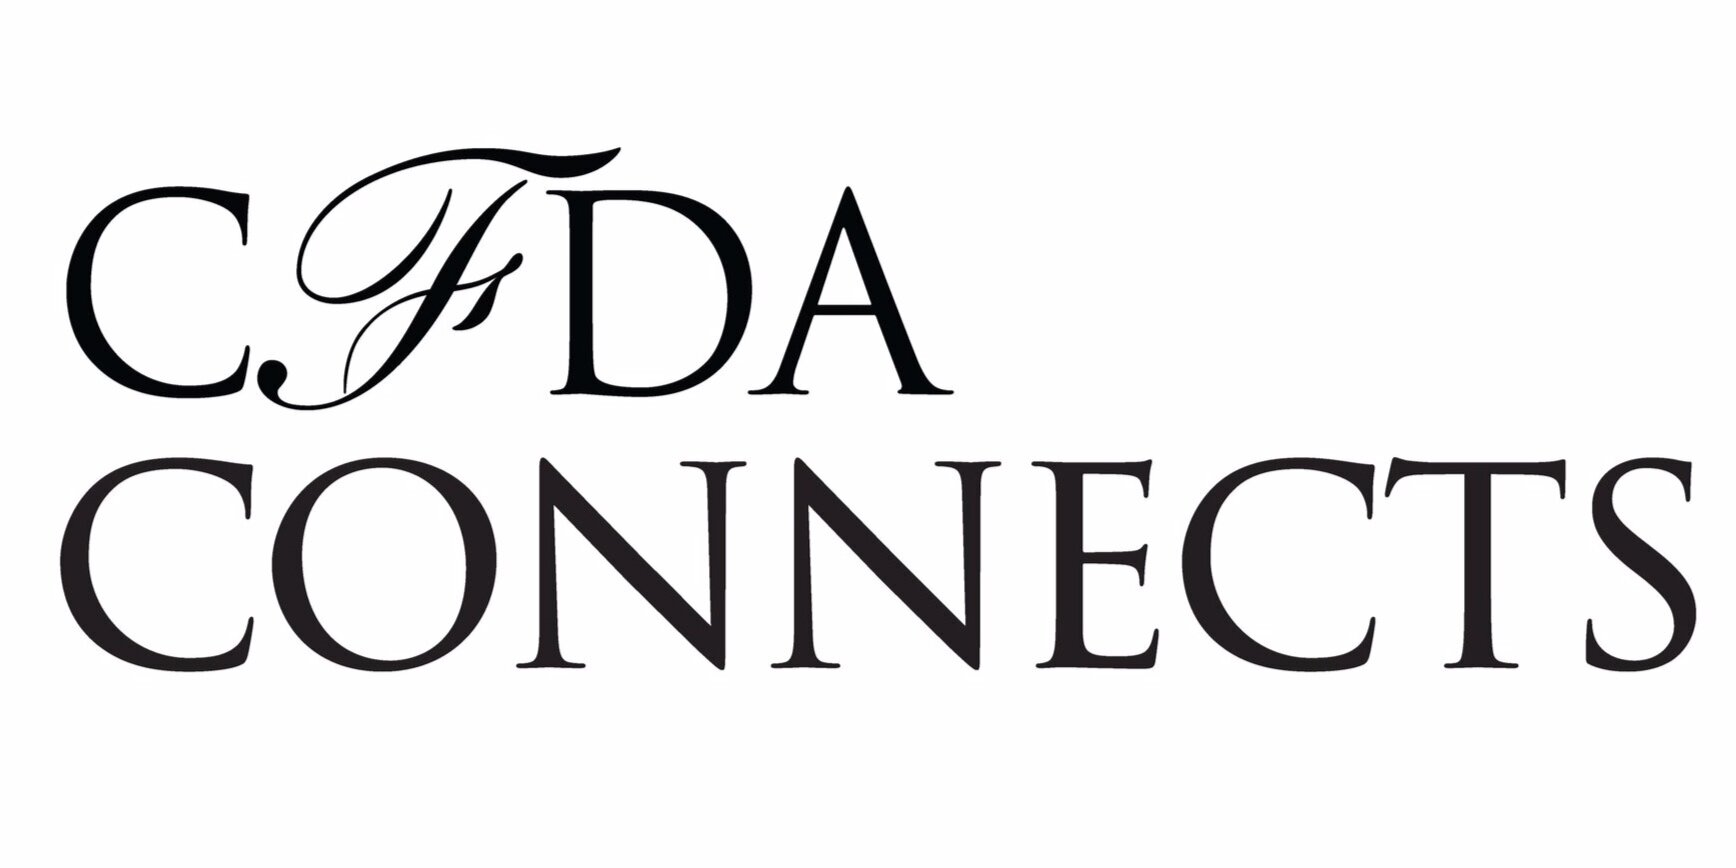 CFDA Connects